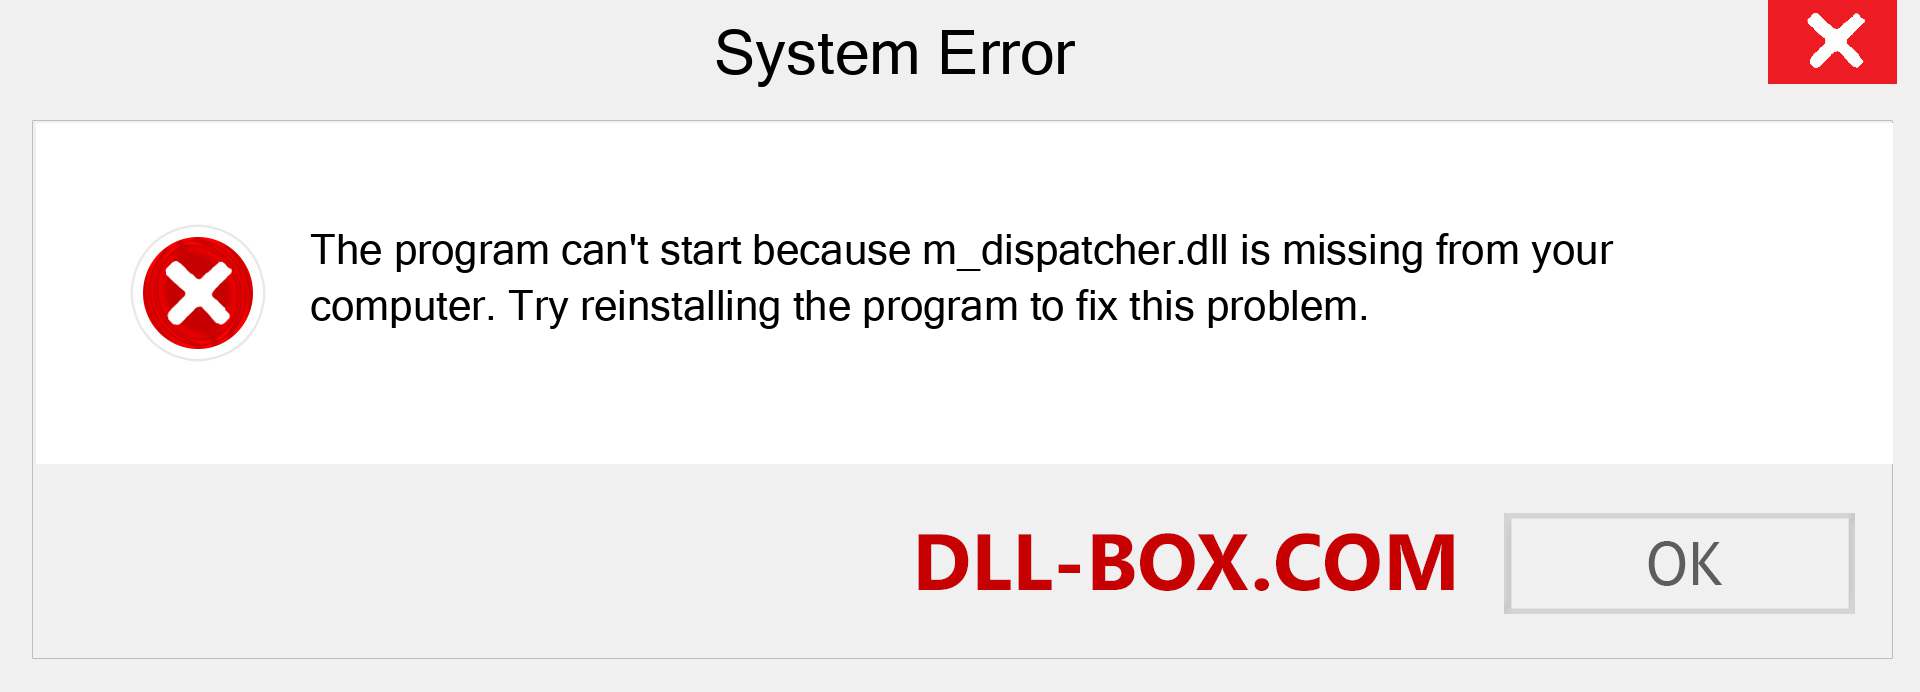  m_dispatcher.dll file is missing?. Download for Windows 7, 8, 10 - Fix  m_dispatcher dll Missing Error on Windows, photos, images